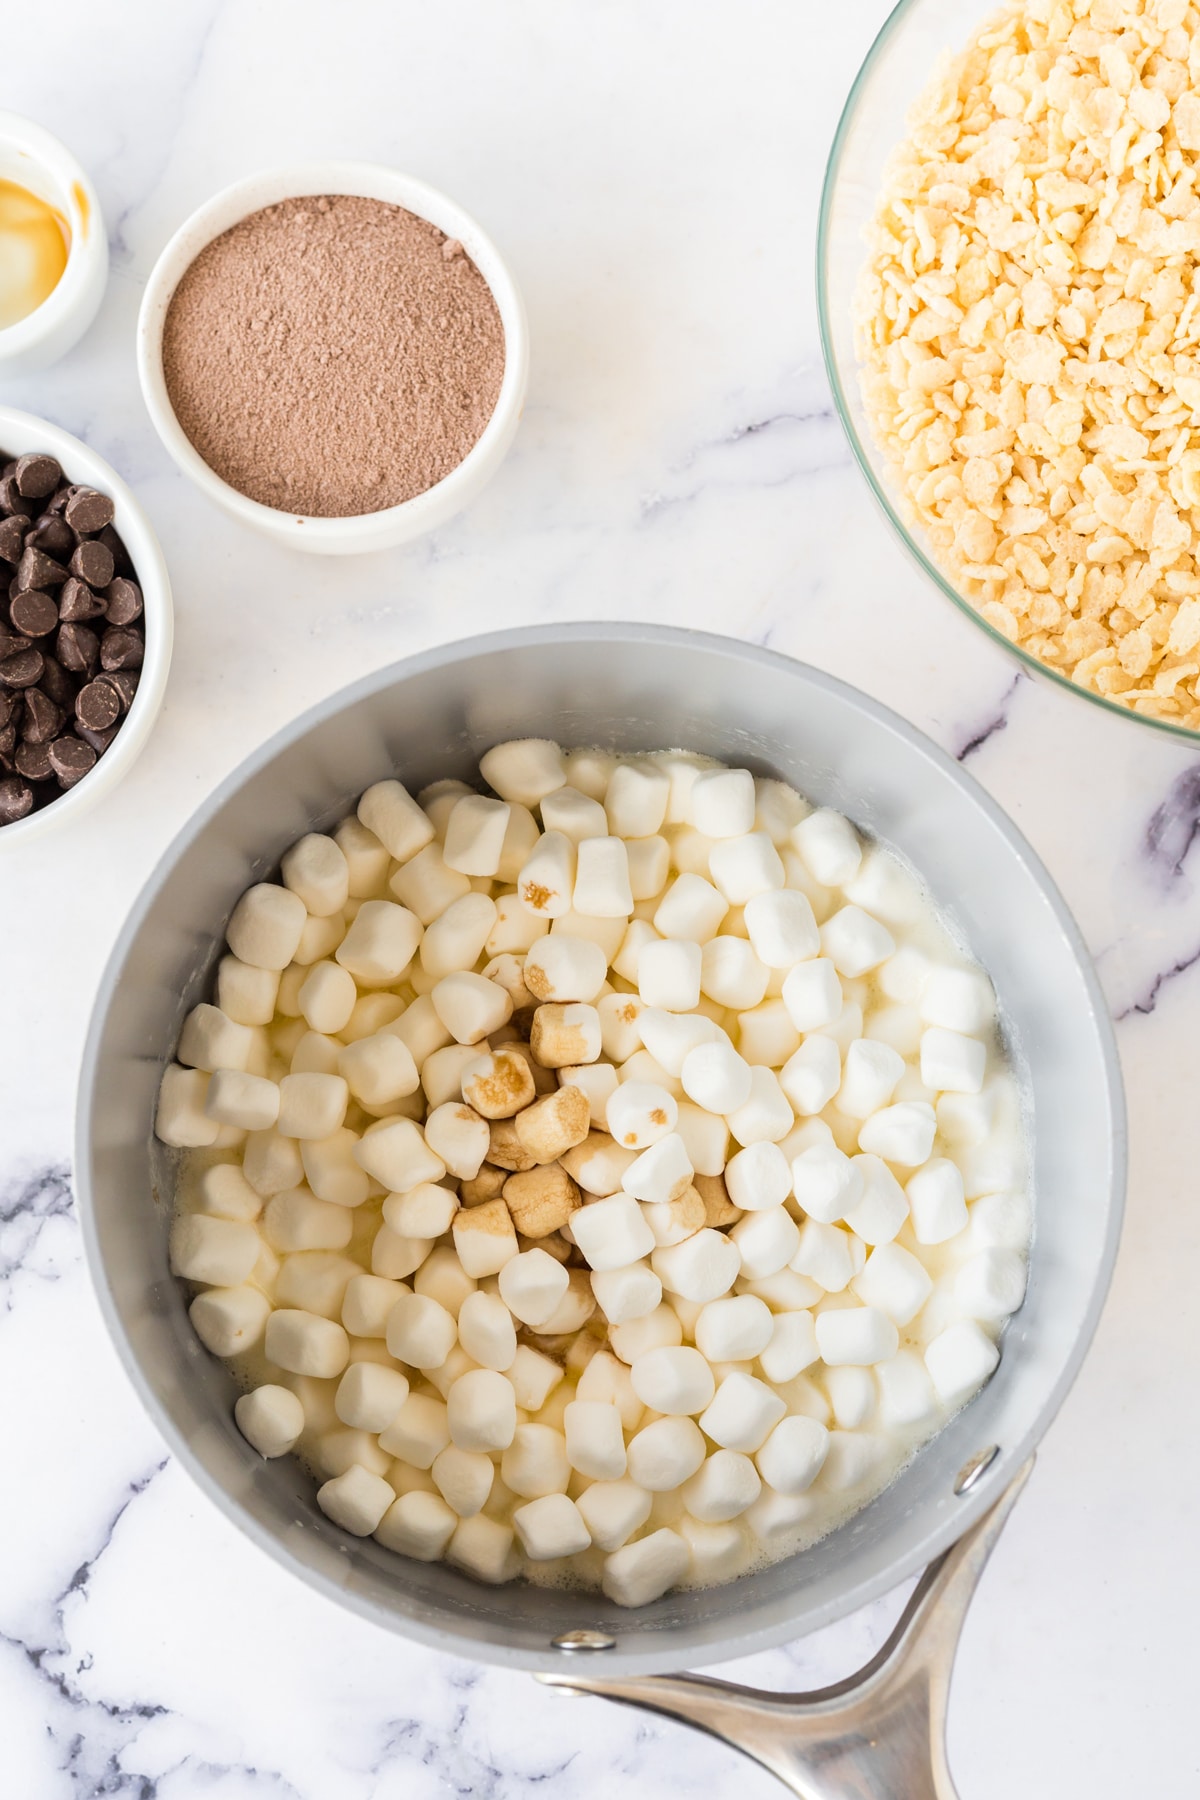 Melting marshmallows in a pan is one process of preparing Hot Chocolate Rice Krispy Treats